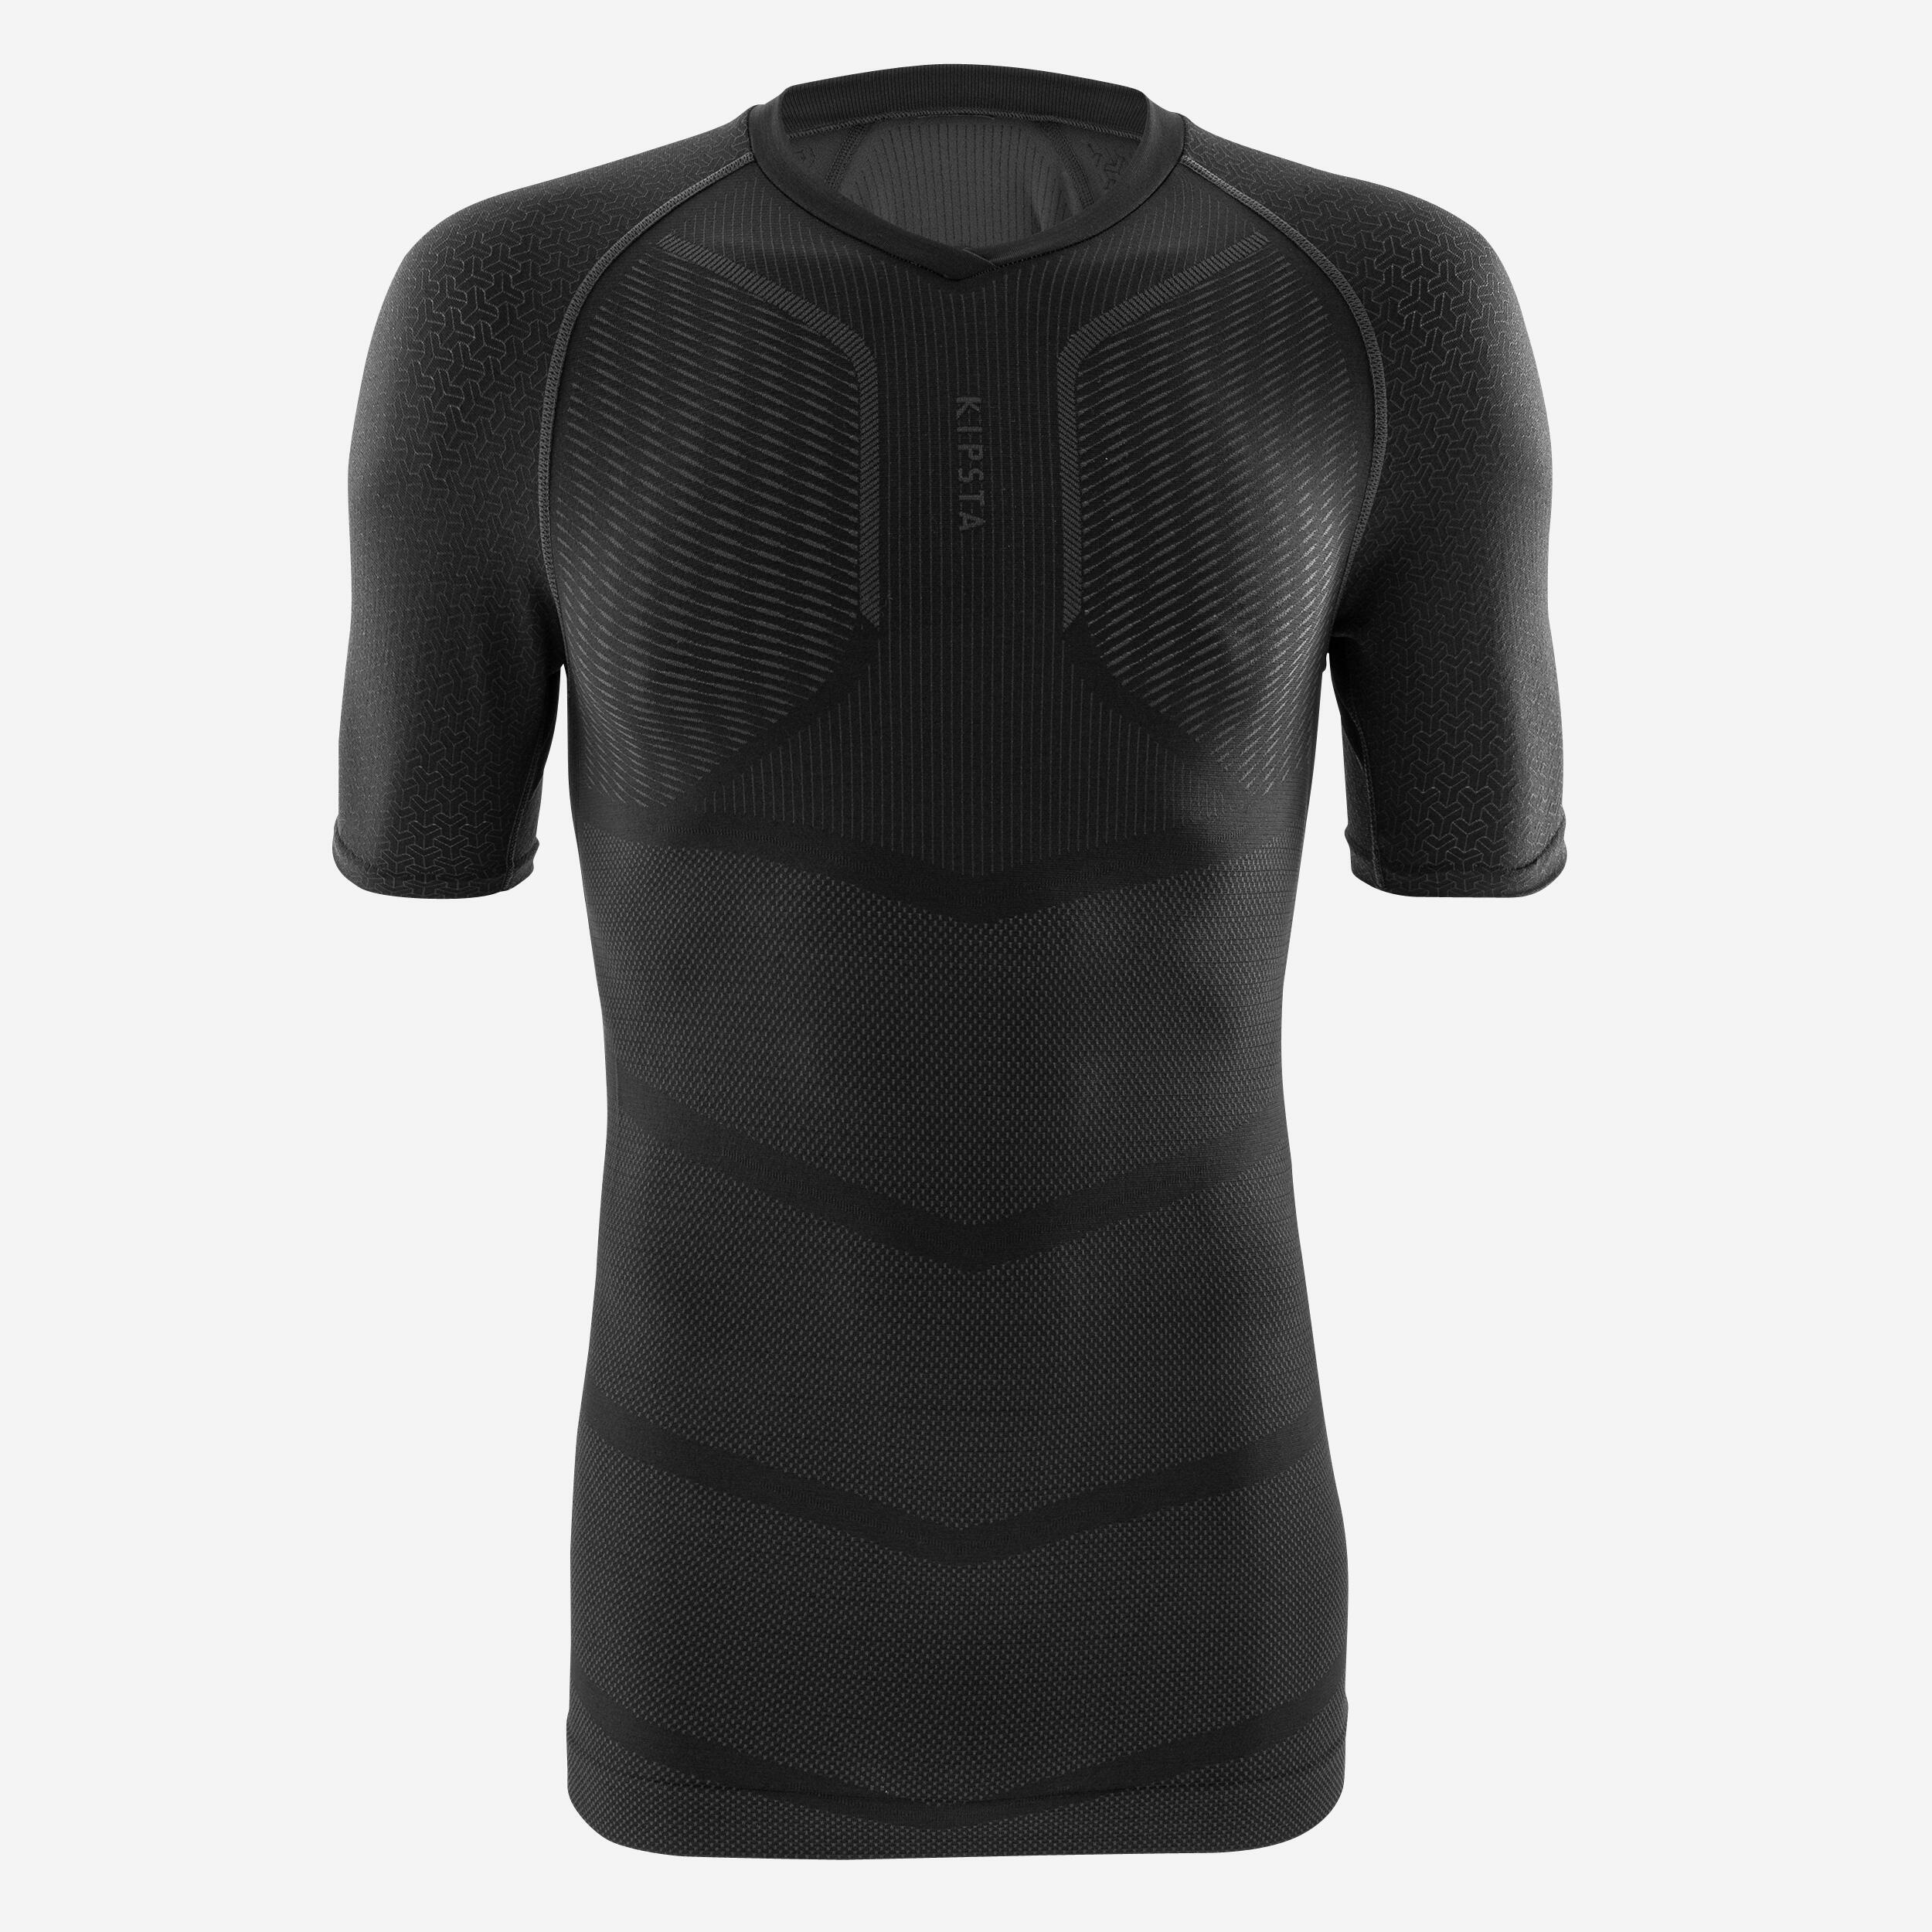 Adult Short-Sleeved Thermal Base Layer Top Keepdry 500 - Black 3/6